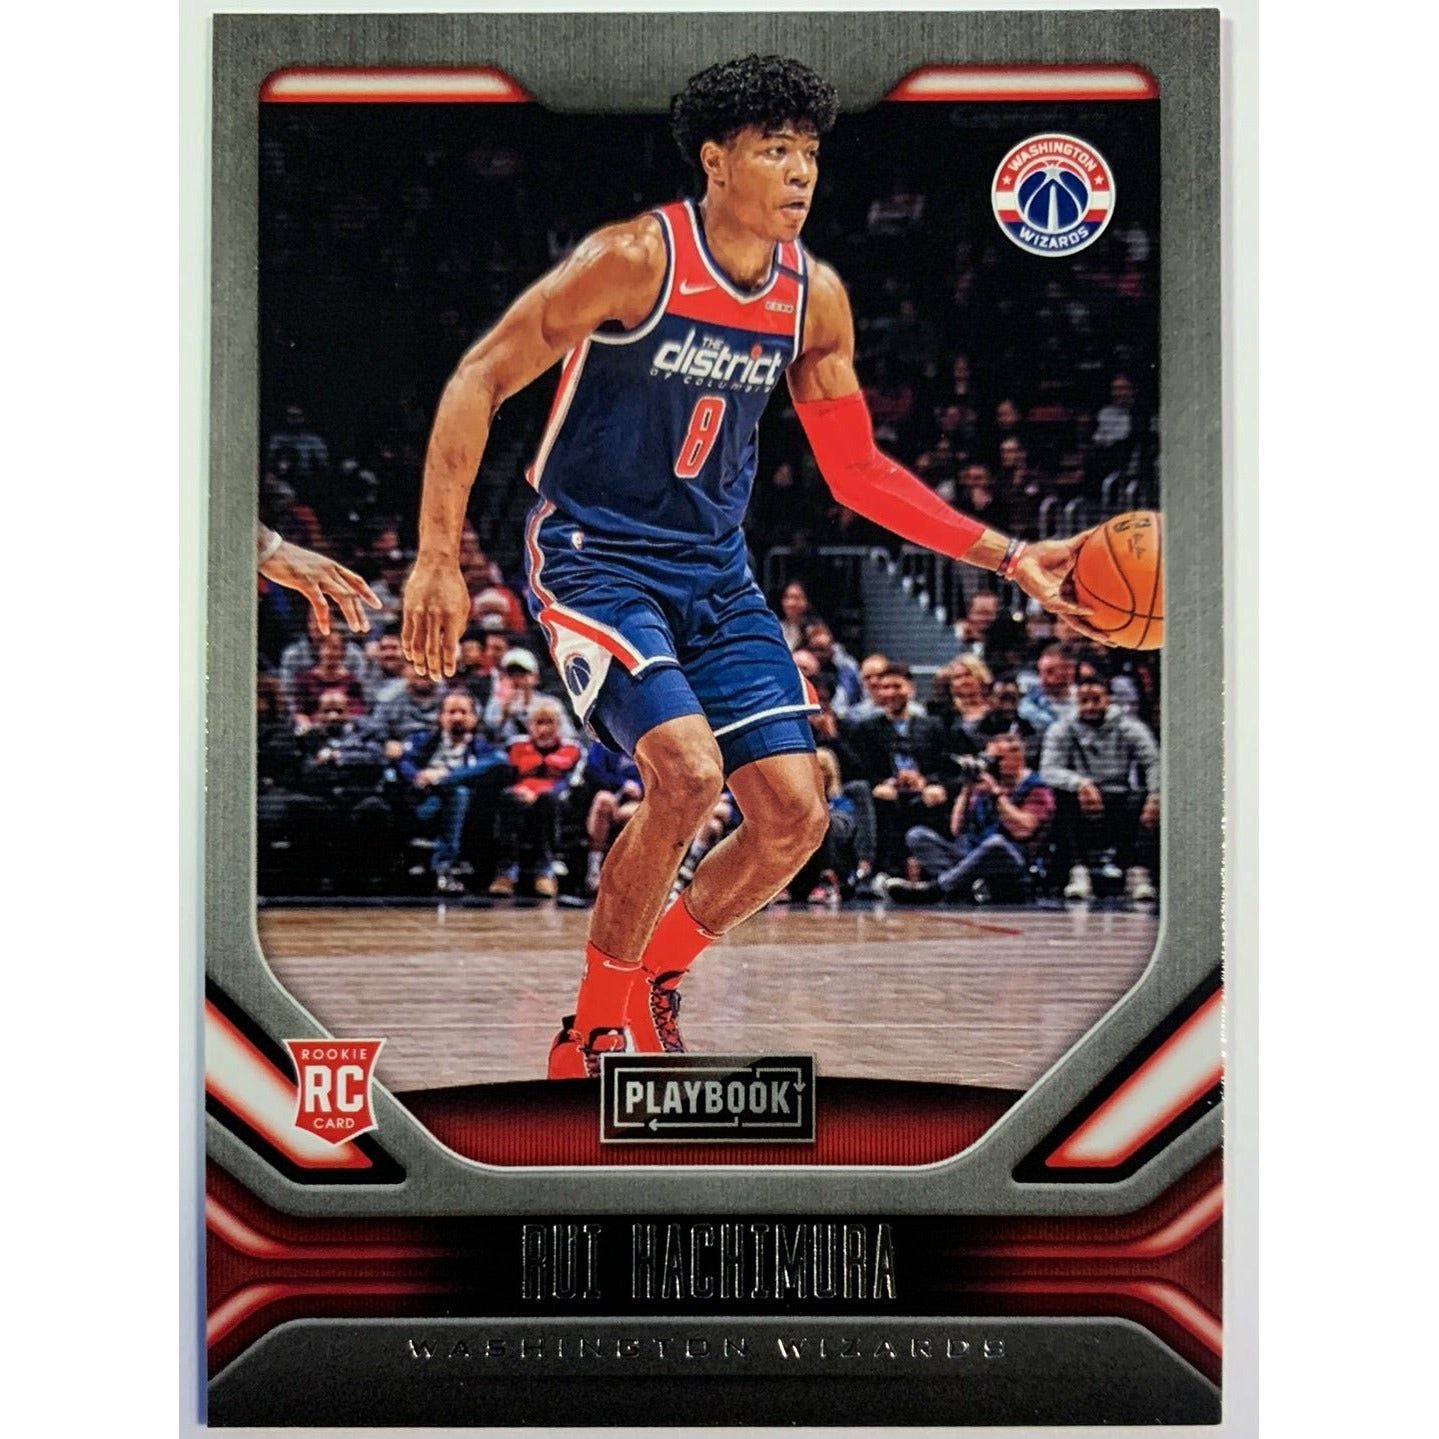  2019-20 Playbook Rui Hachimura RC  Local Legends Cards & Collectibles